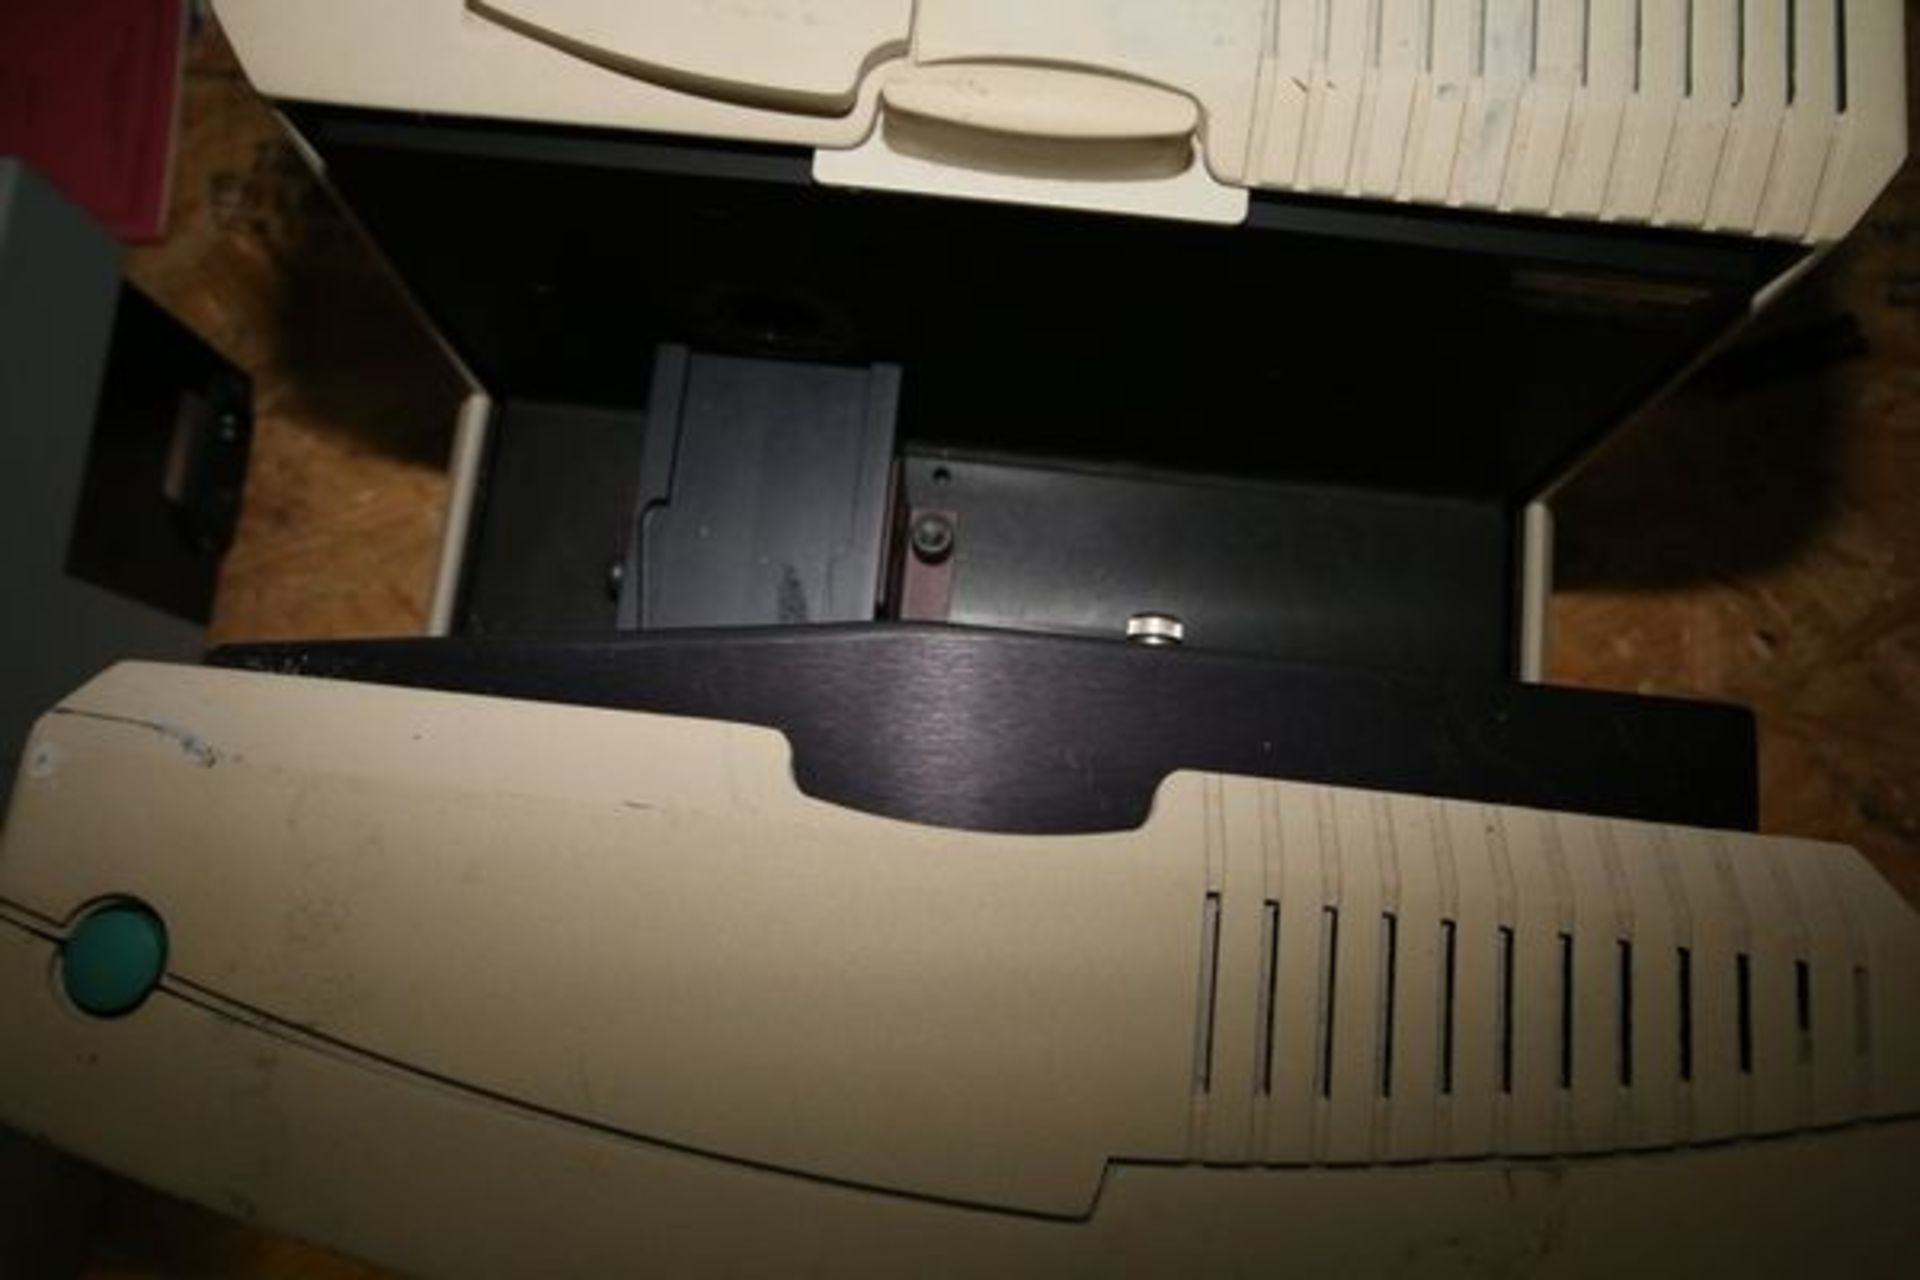 HunterLab UltraScan XE Spectrophotometer, S/N 2074, with 14" Long x 4" Wide x 6 1/2" High Scanning - Image 2 of 2